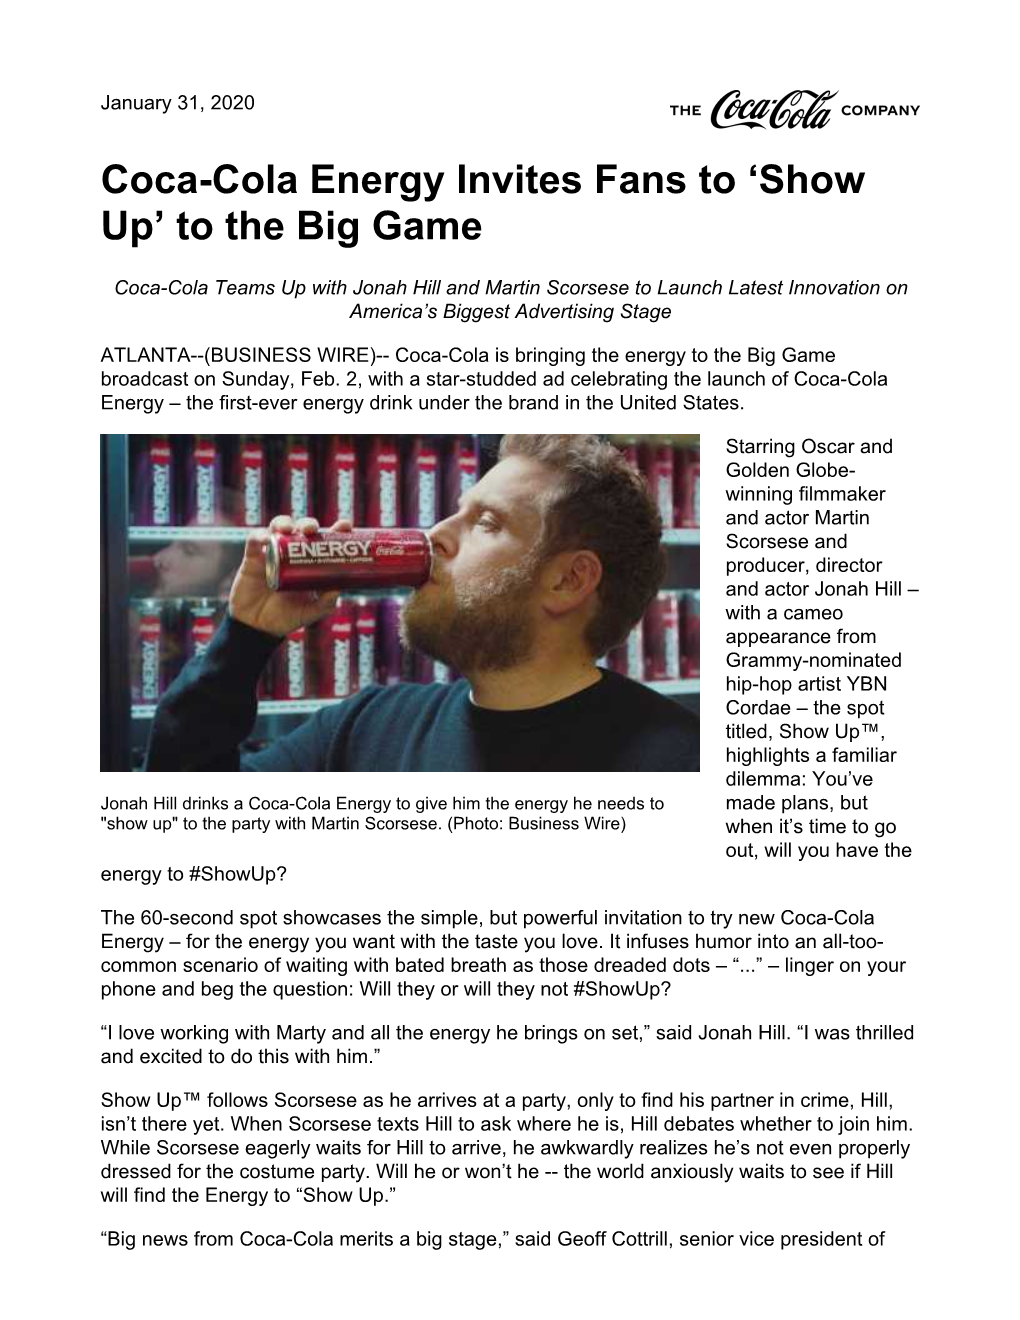 Coca-Cola Energy Invites Fans to ‘Show Up’ to the Big Game